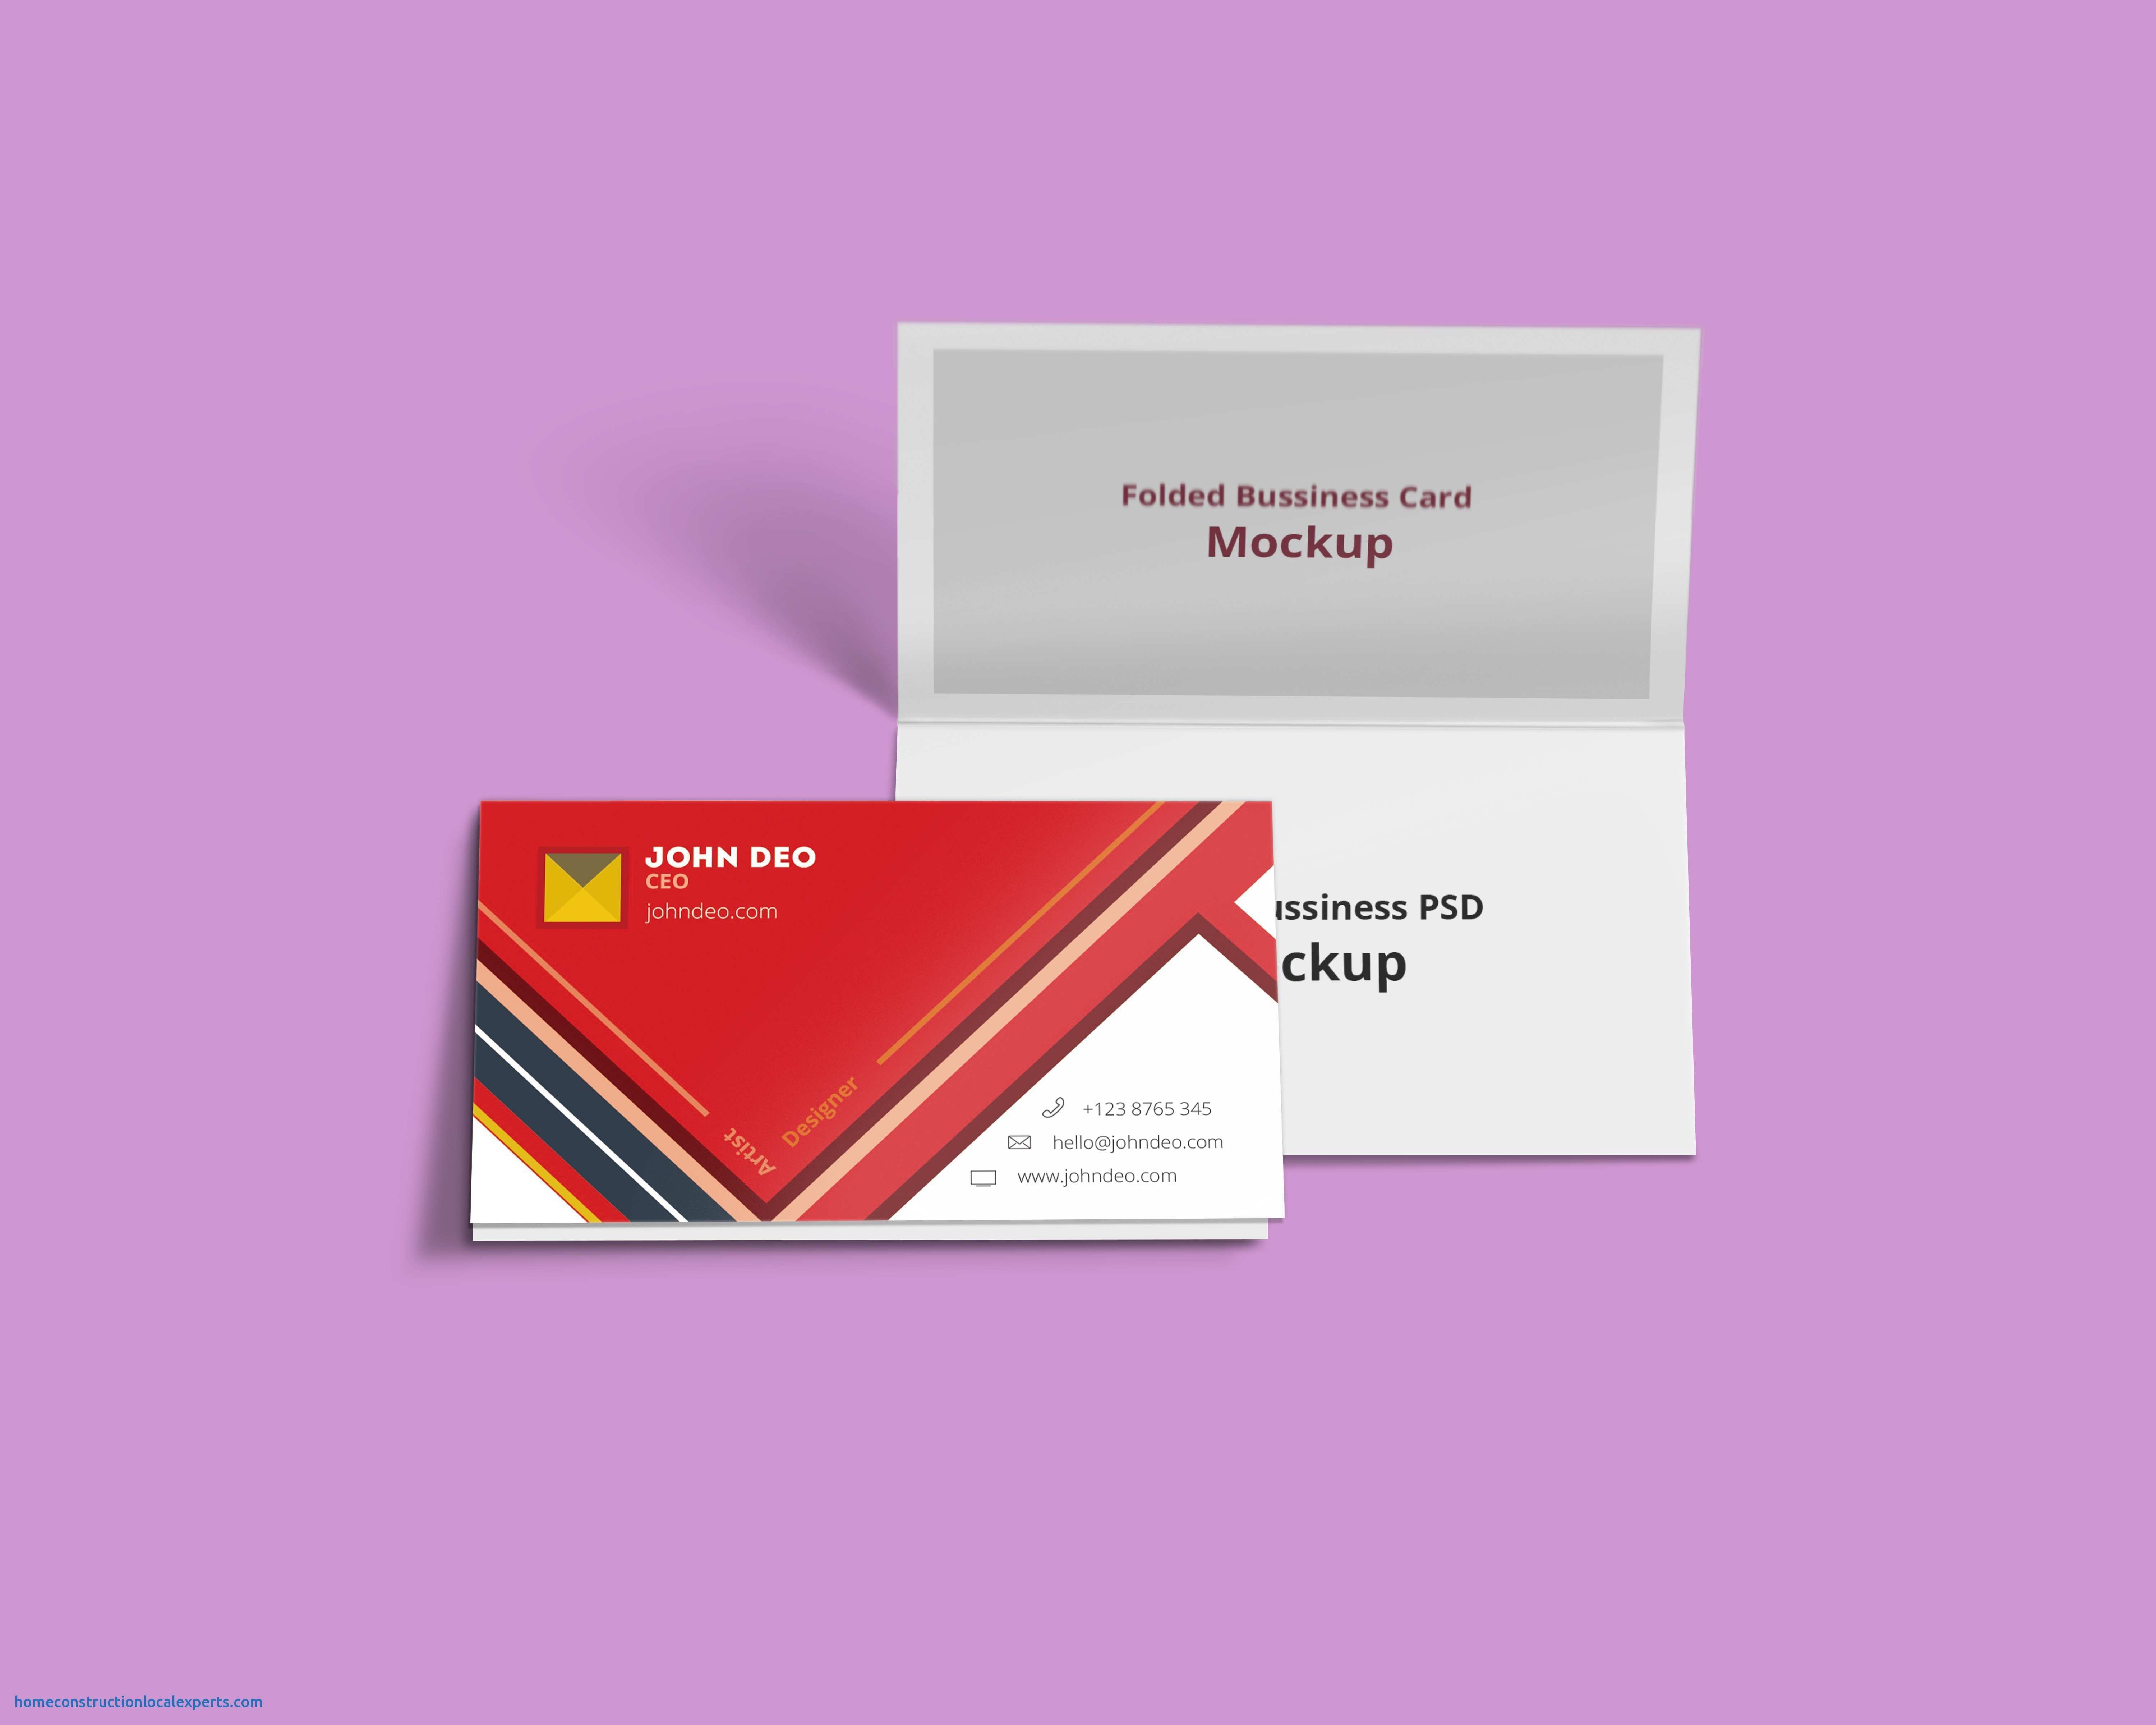 Business Card Template Word 2010